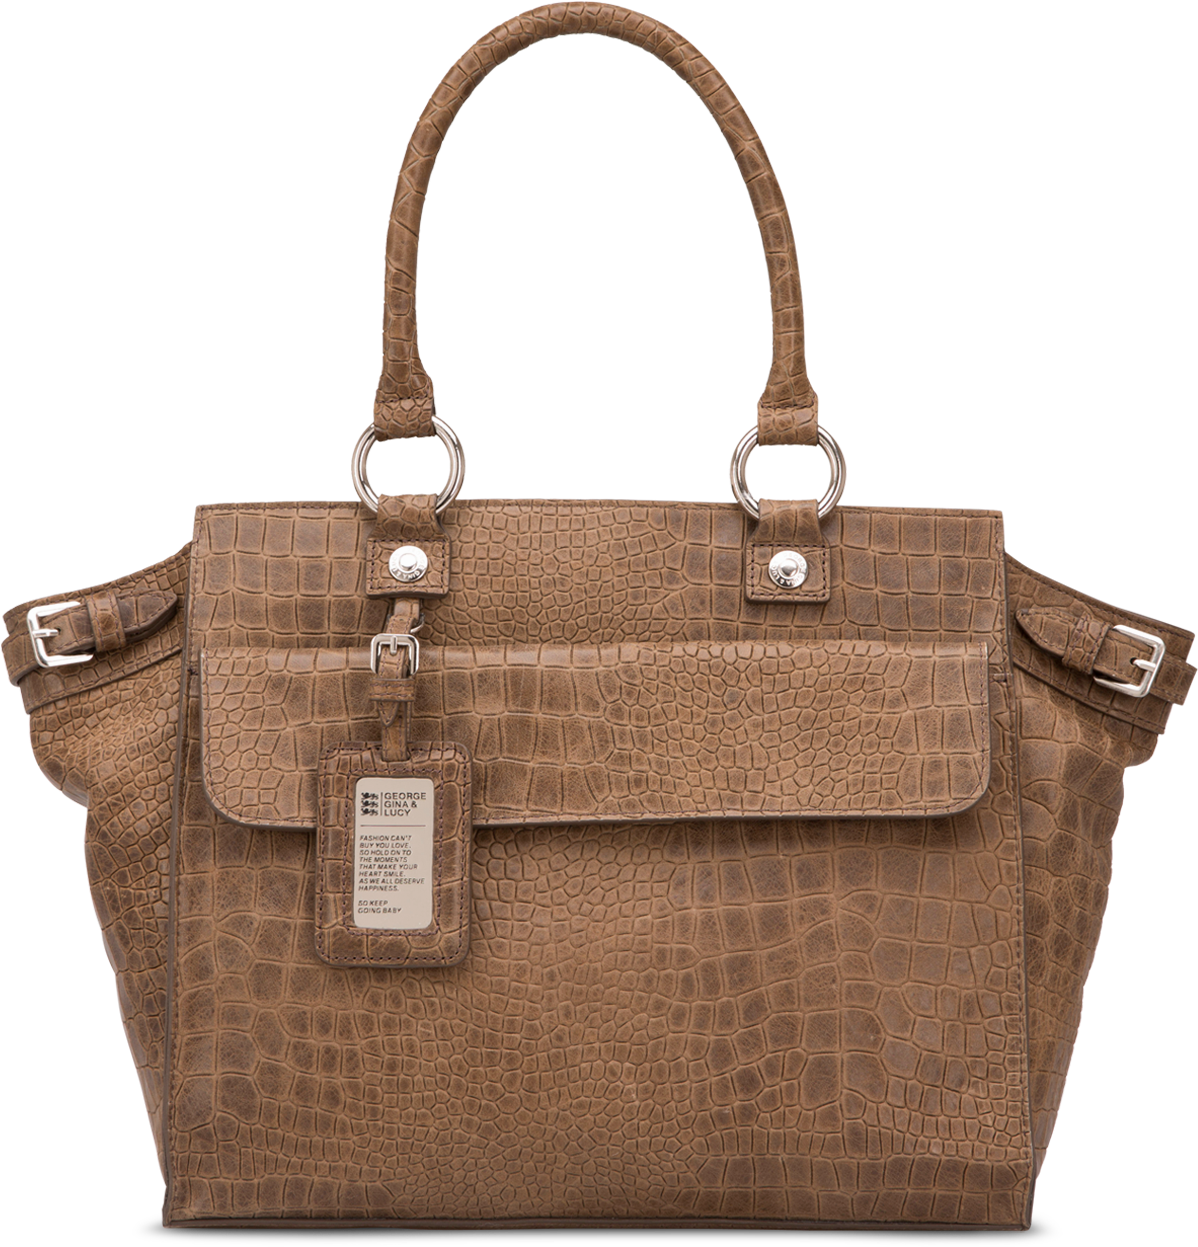 A Brown Purse With Silver Handles